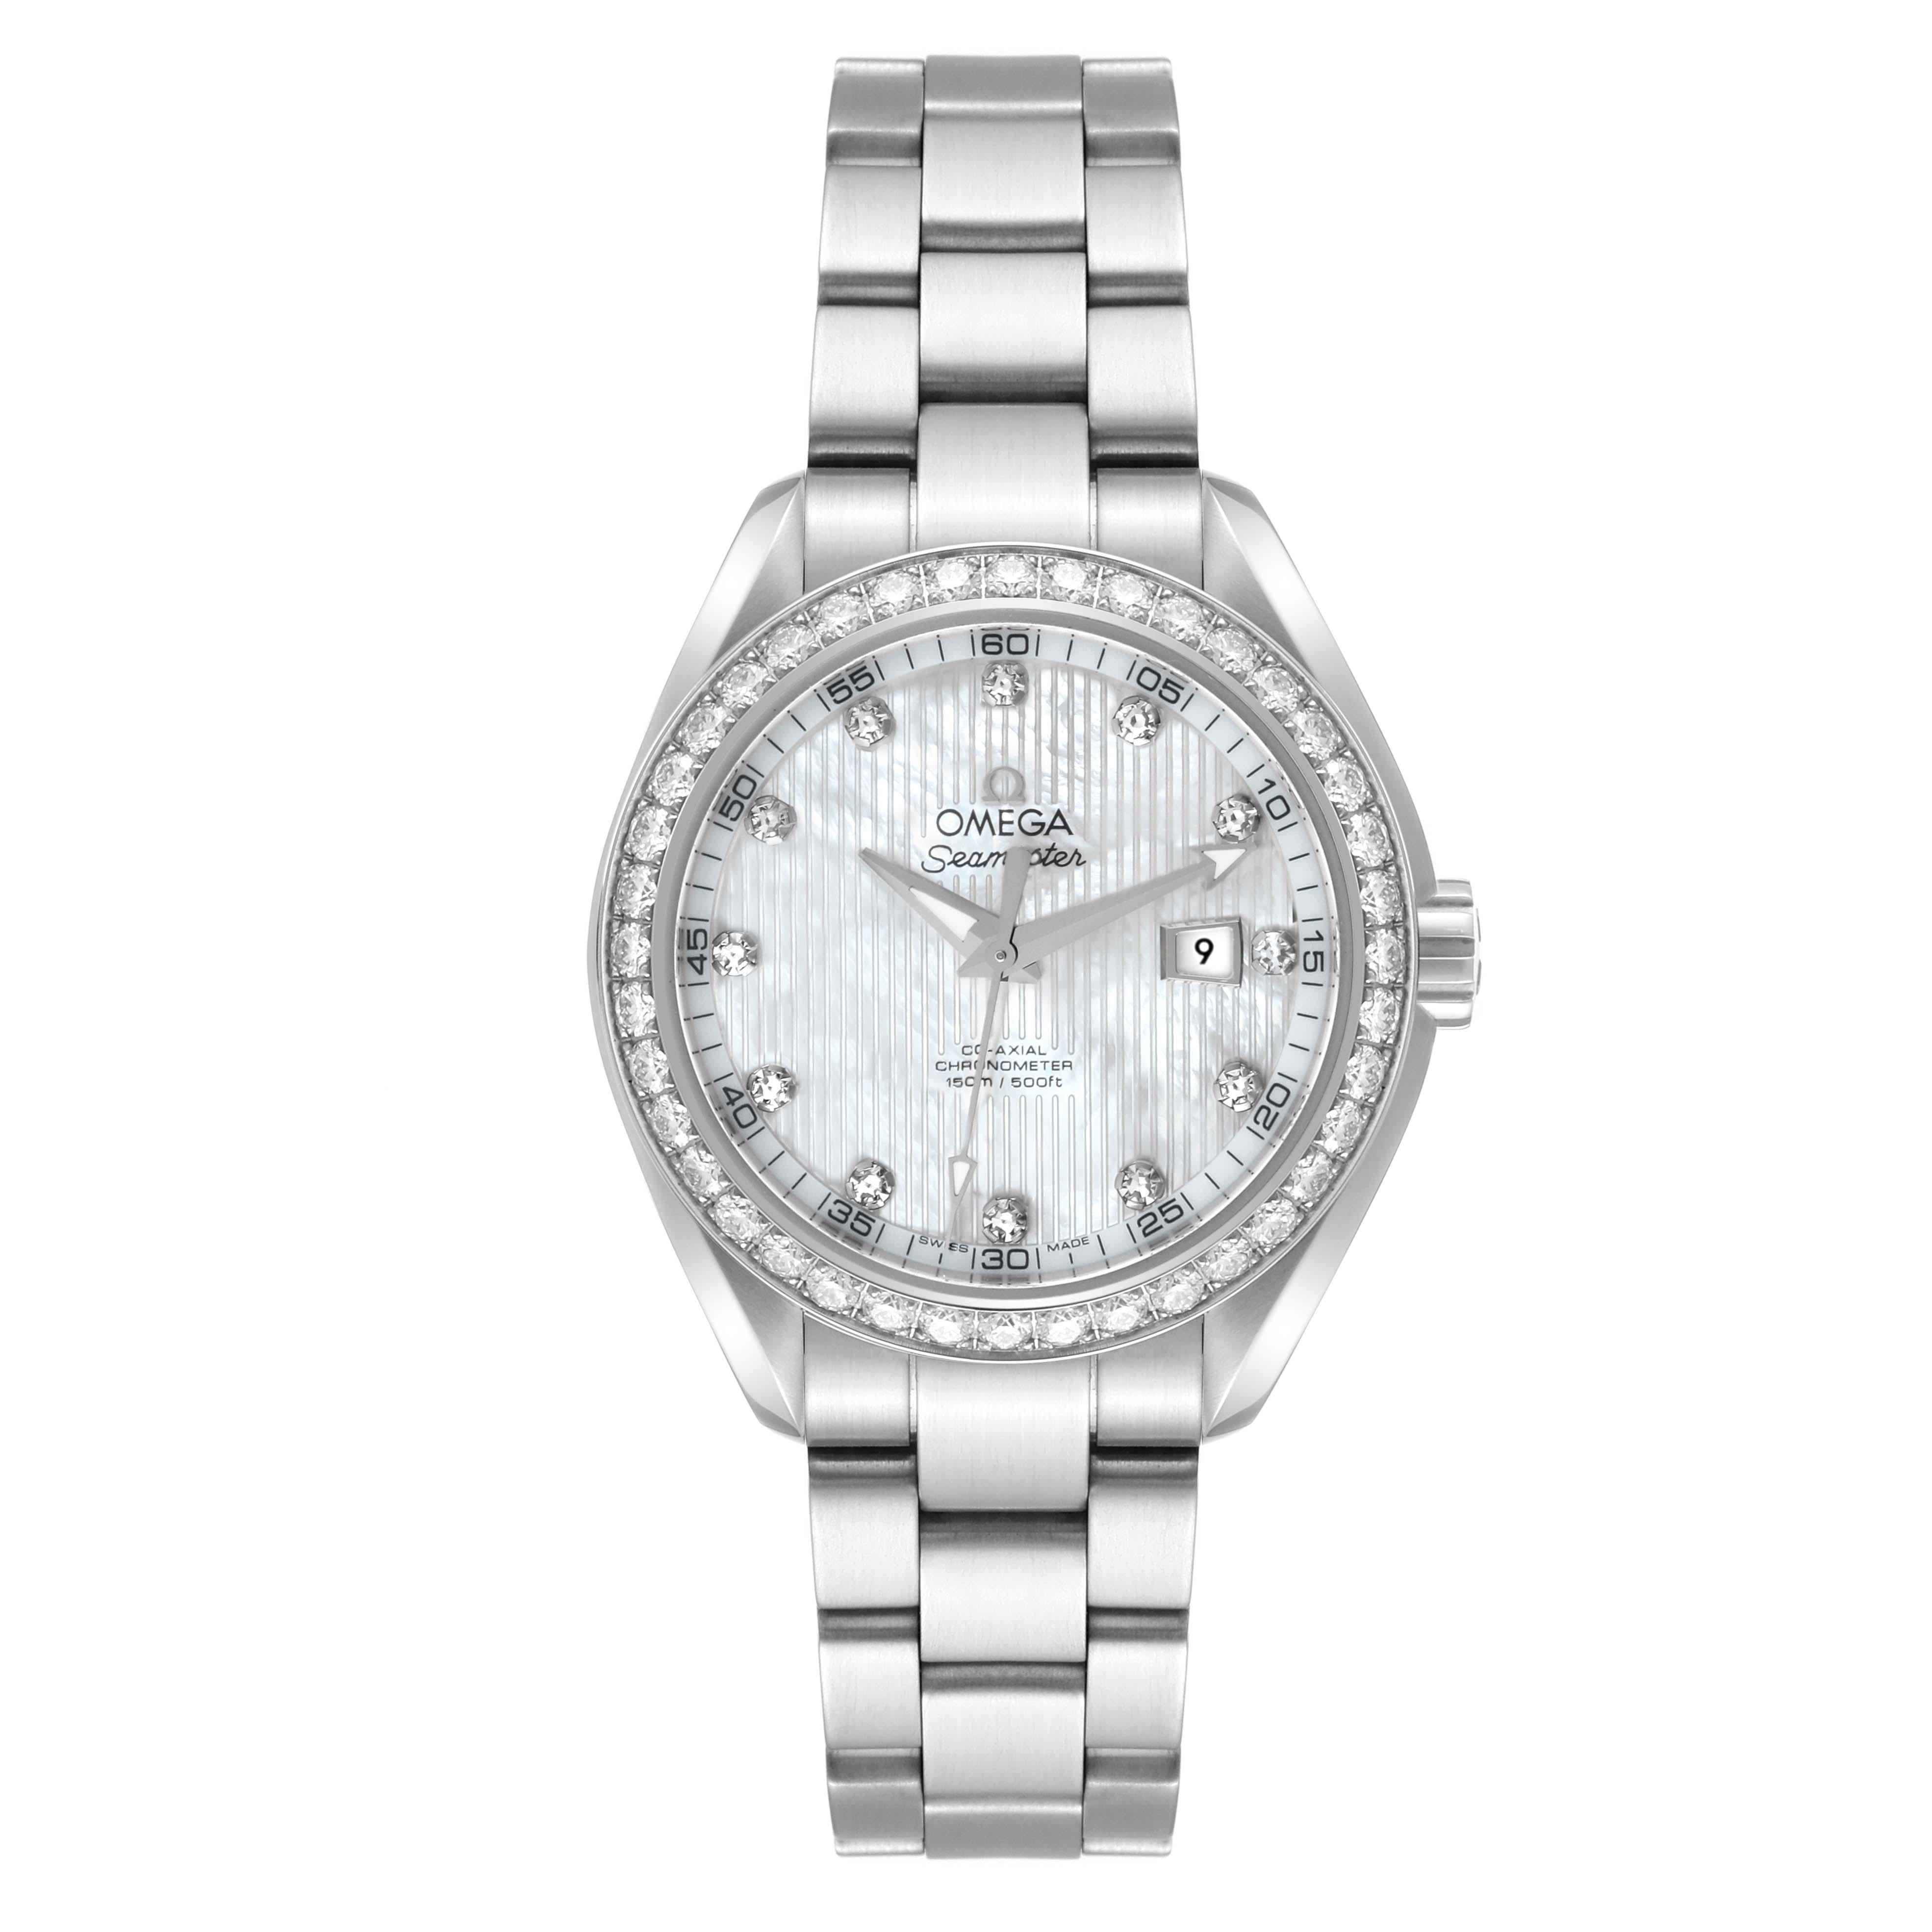 Omega Aqua Terra Mother of Pearl Steel Diamond Ladies Watch 231.15.34.20.55.001 Box Card. Automatic self-winding movement with Co-Axial escapement. Free sprung-balance system with silicon balance-spring. Automatic winding in both directions. Rhodium